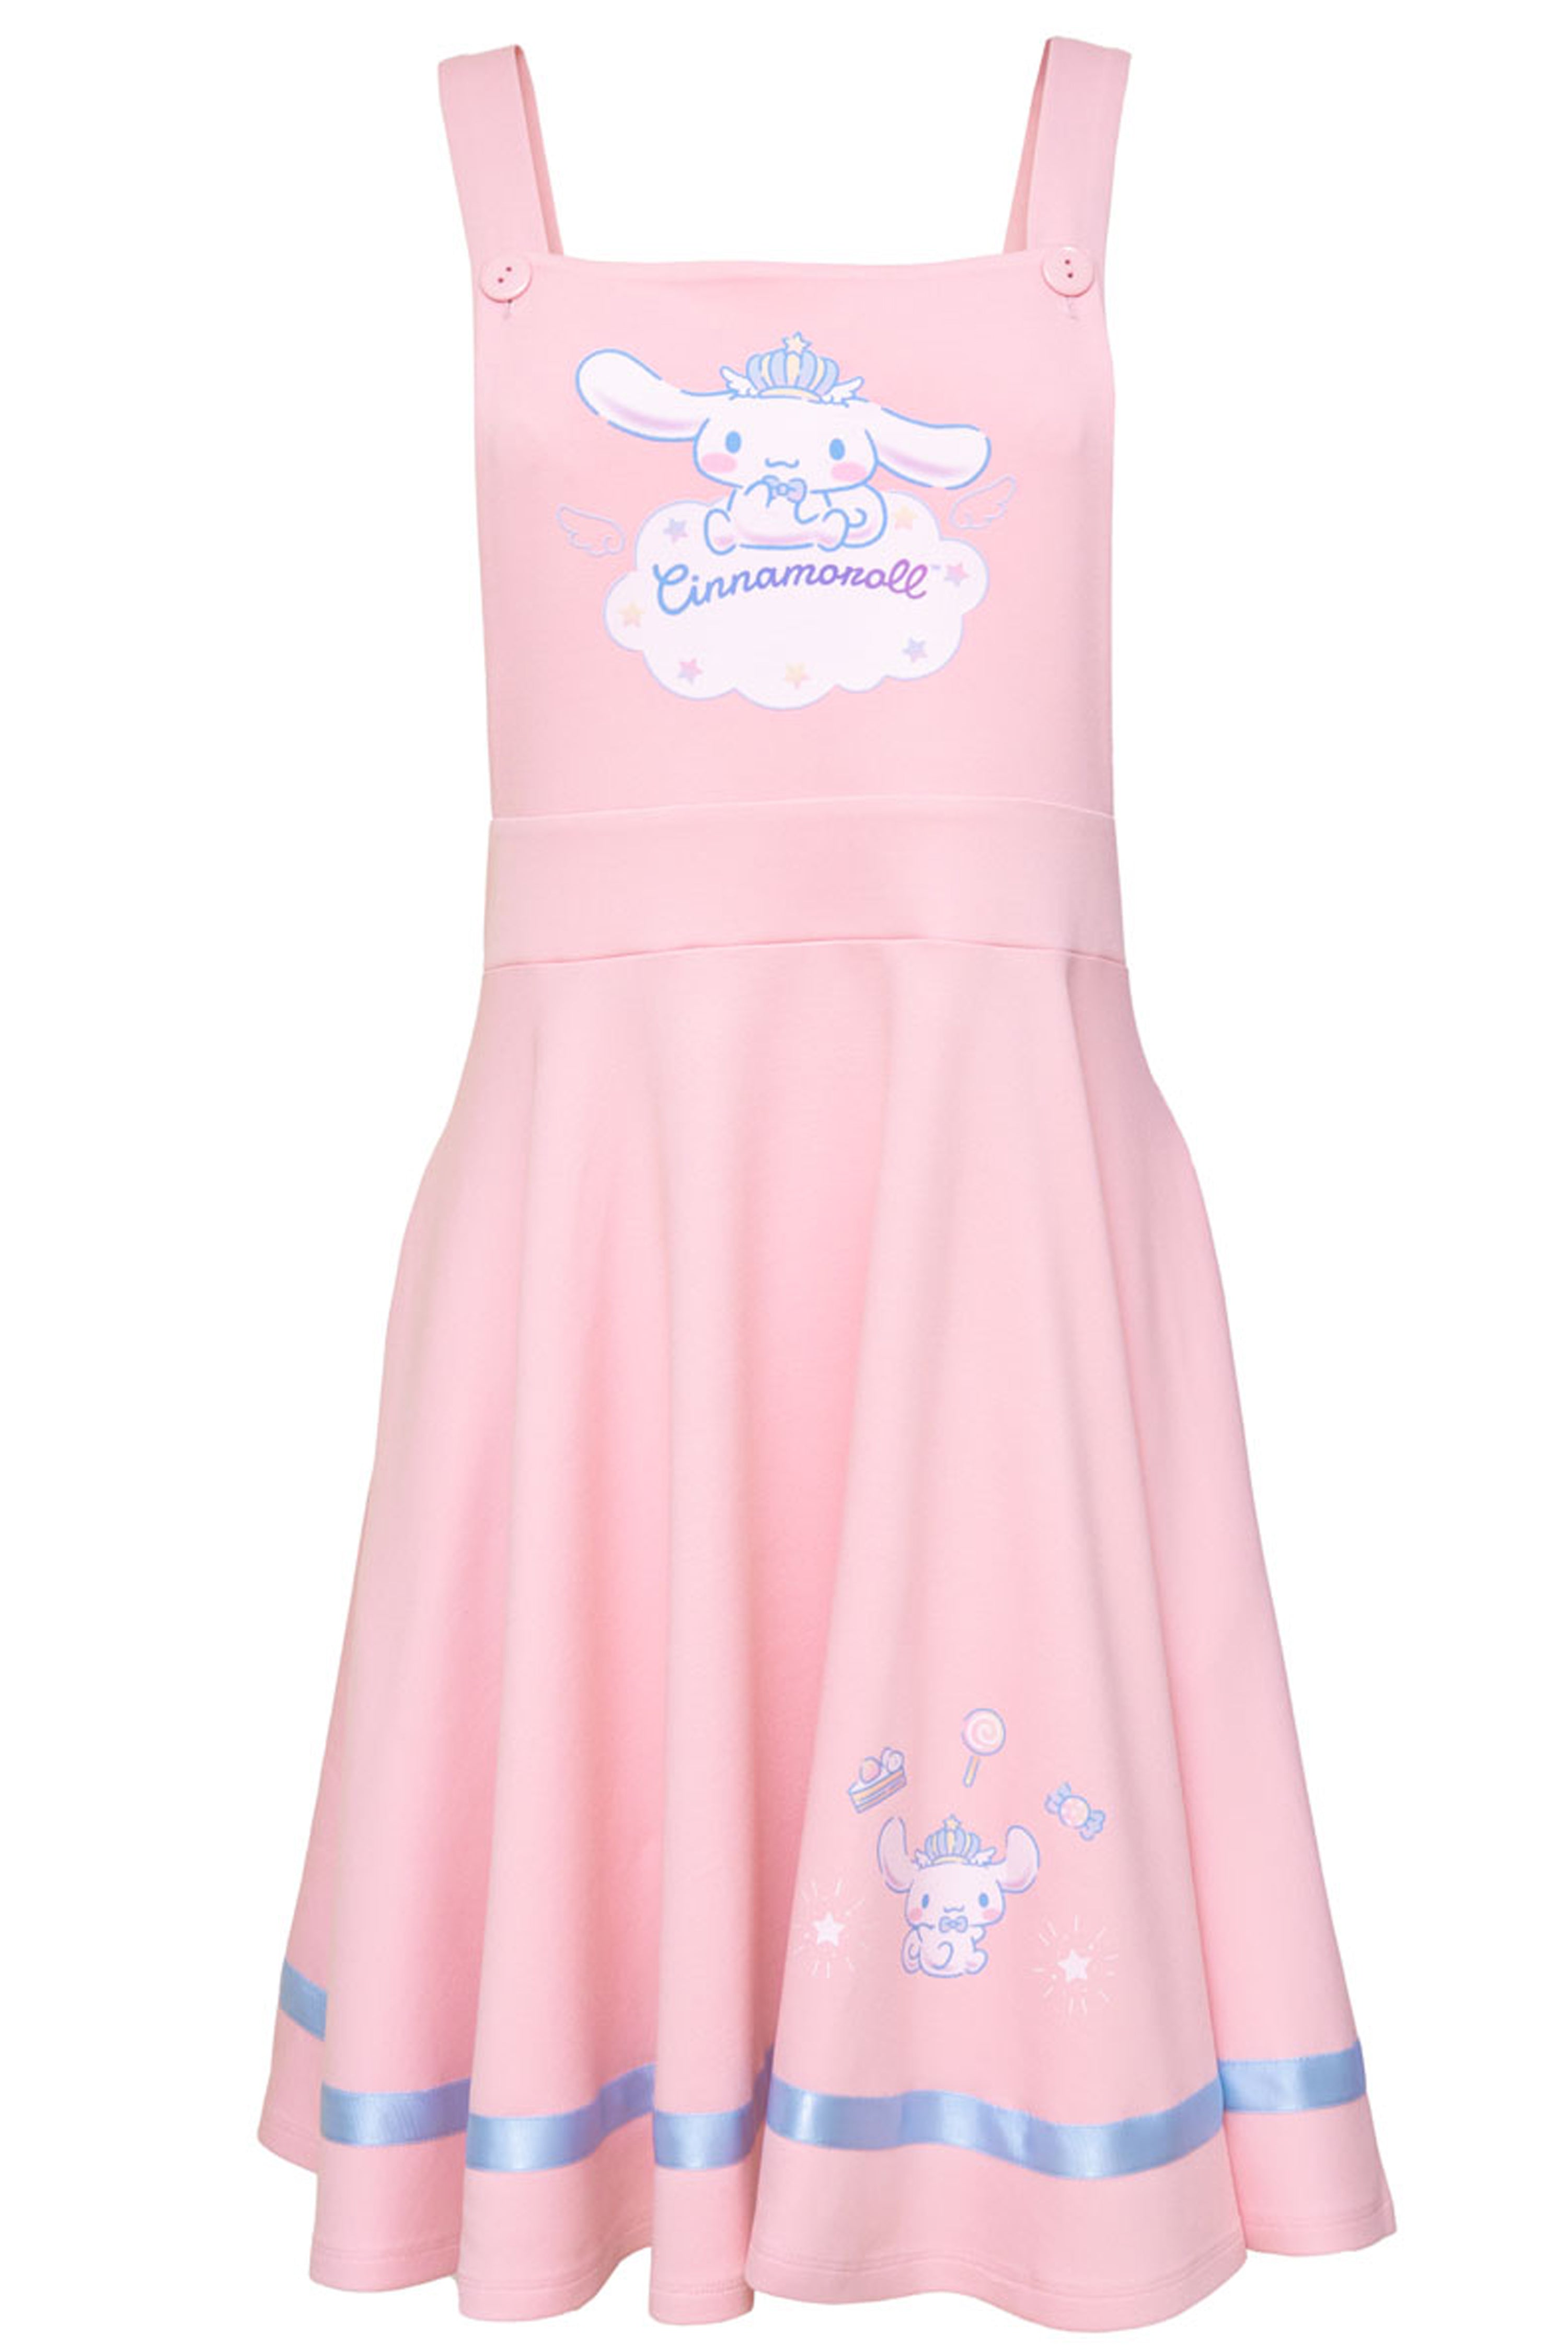 pink pinafore dress with a cute print of Cinnamoroll on a cloud on the front. The skirt has a blue statin ribbon and print of Cinnamoroll with some yummy sweets. The pinafore dress straps have adjustable length buttons.